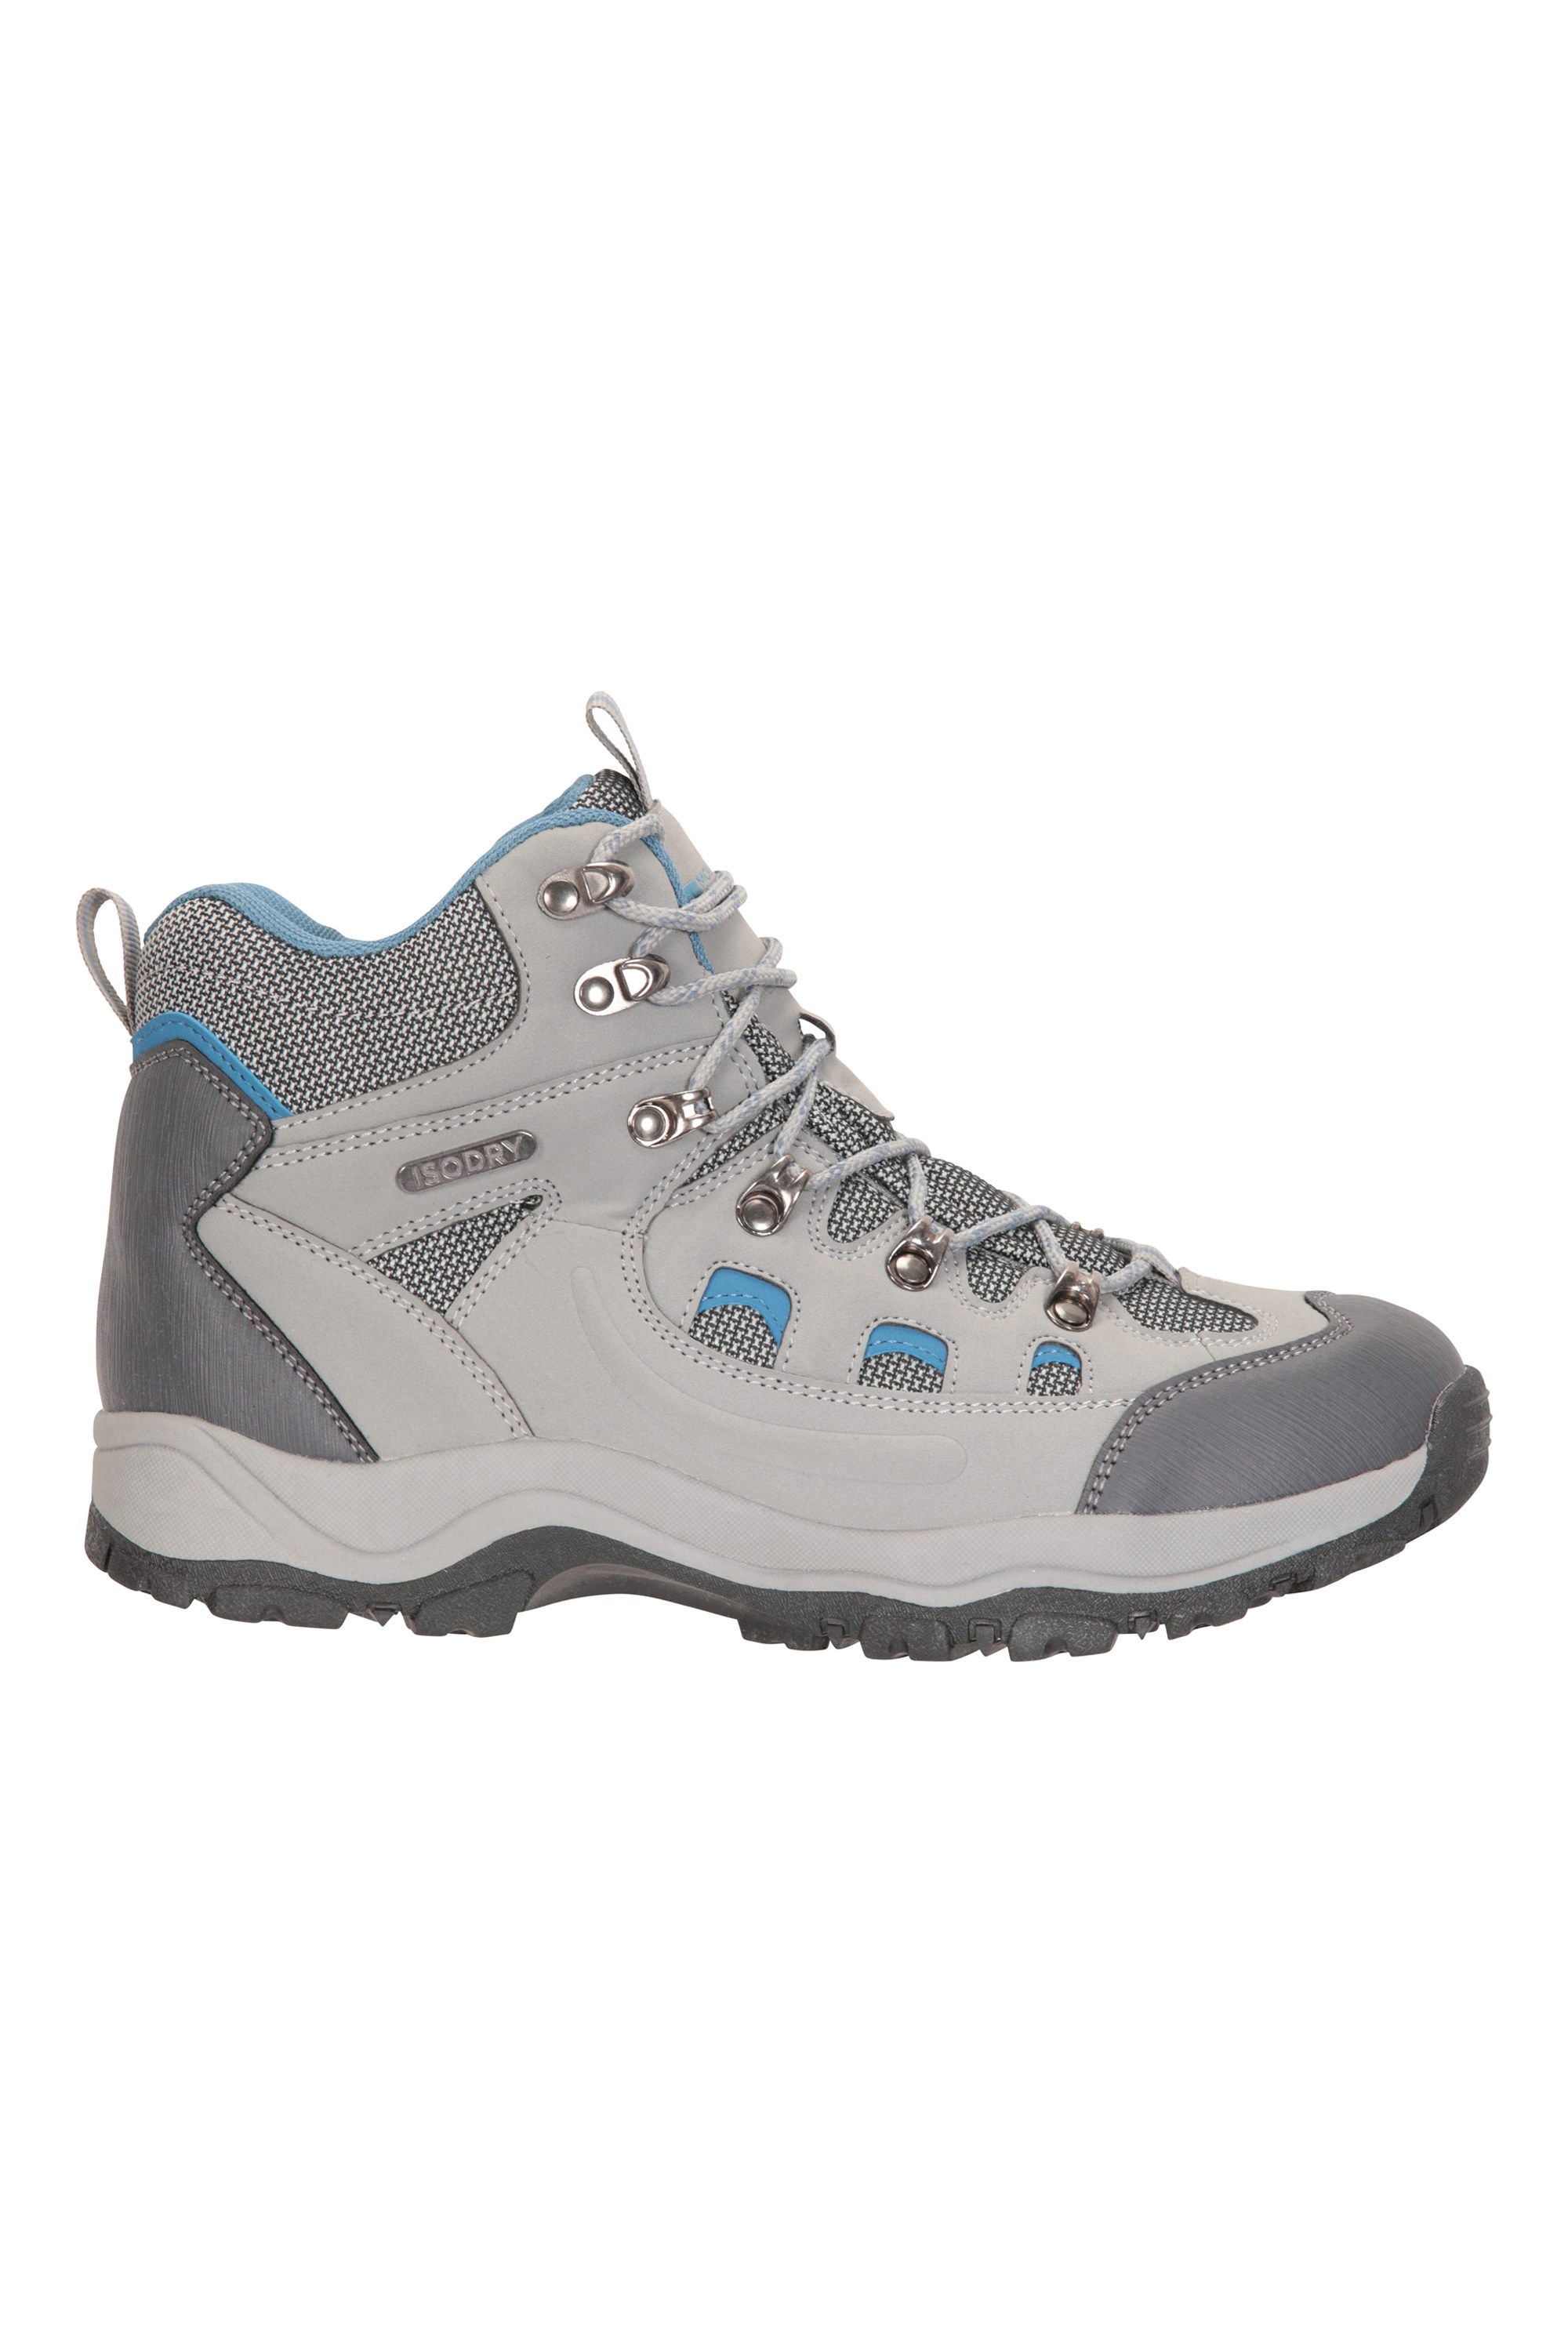 Womens Walking Boots | Hiking Boots 